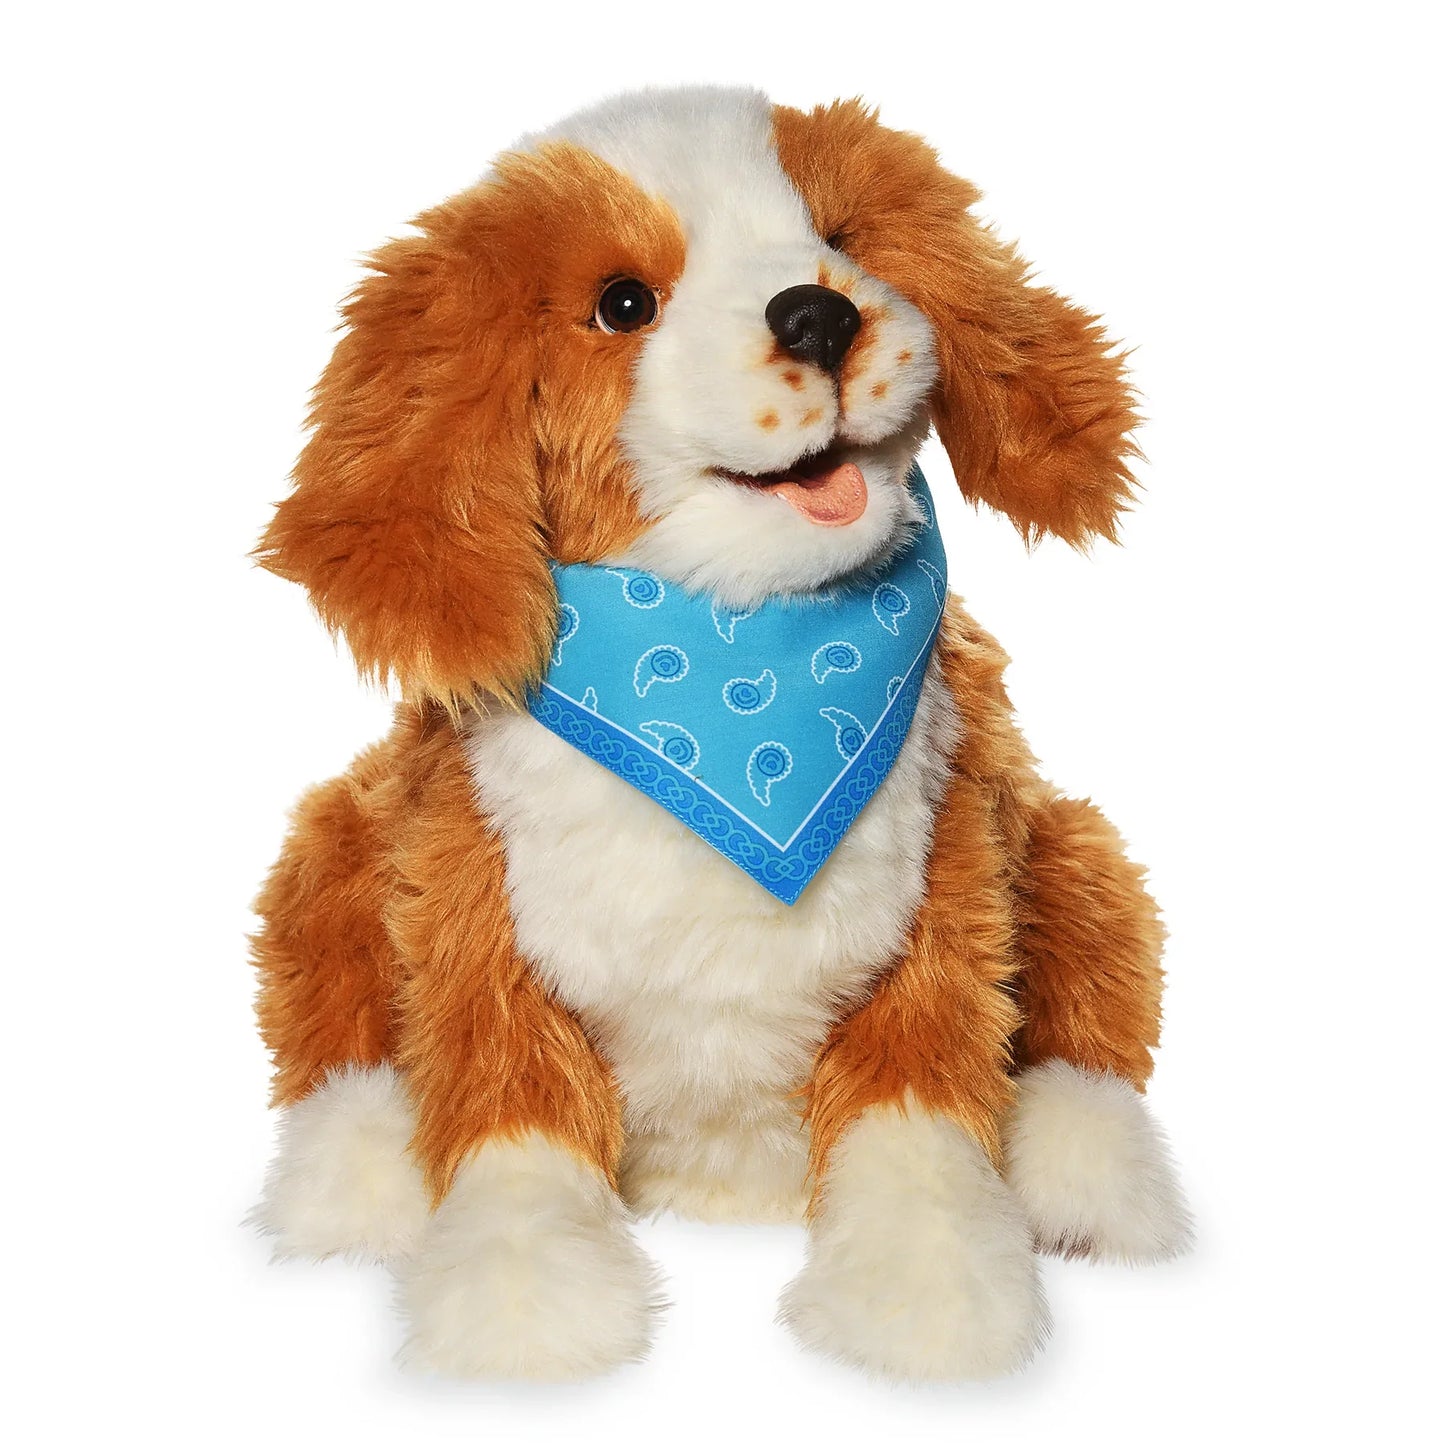 Interactive Dog Plush for Seniors - Brown and White